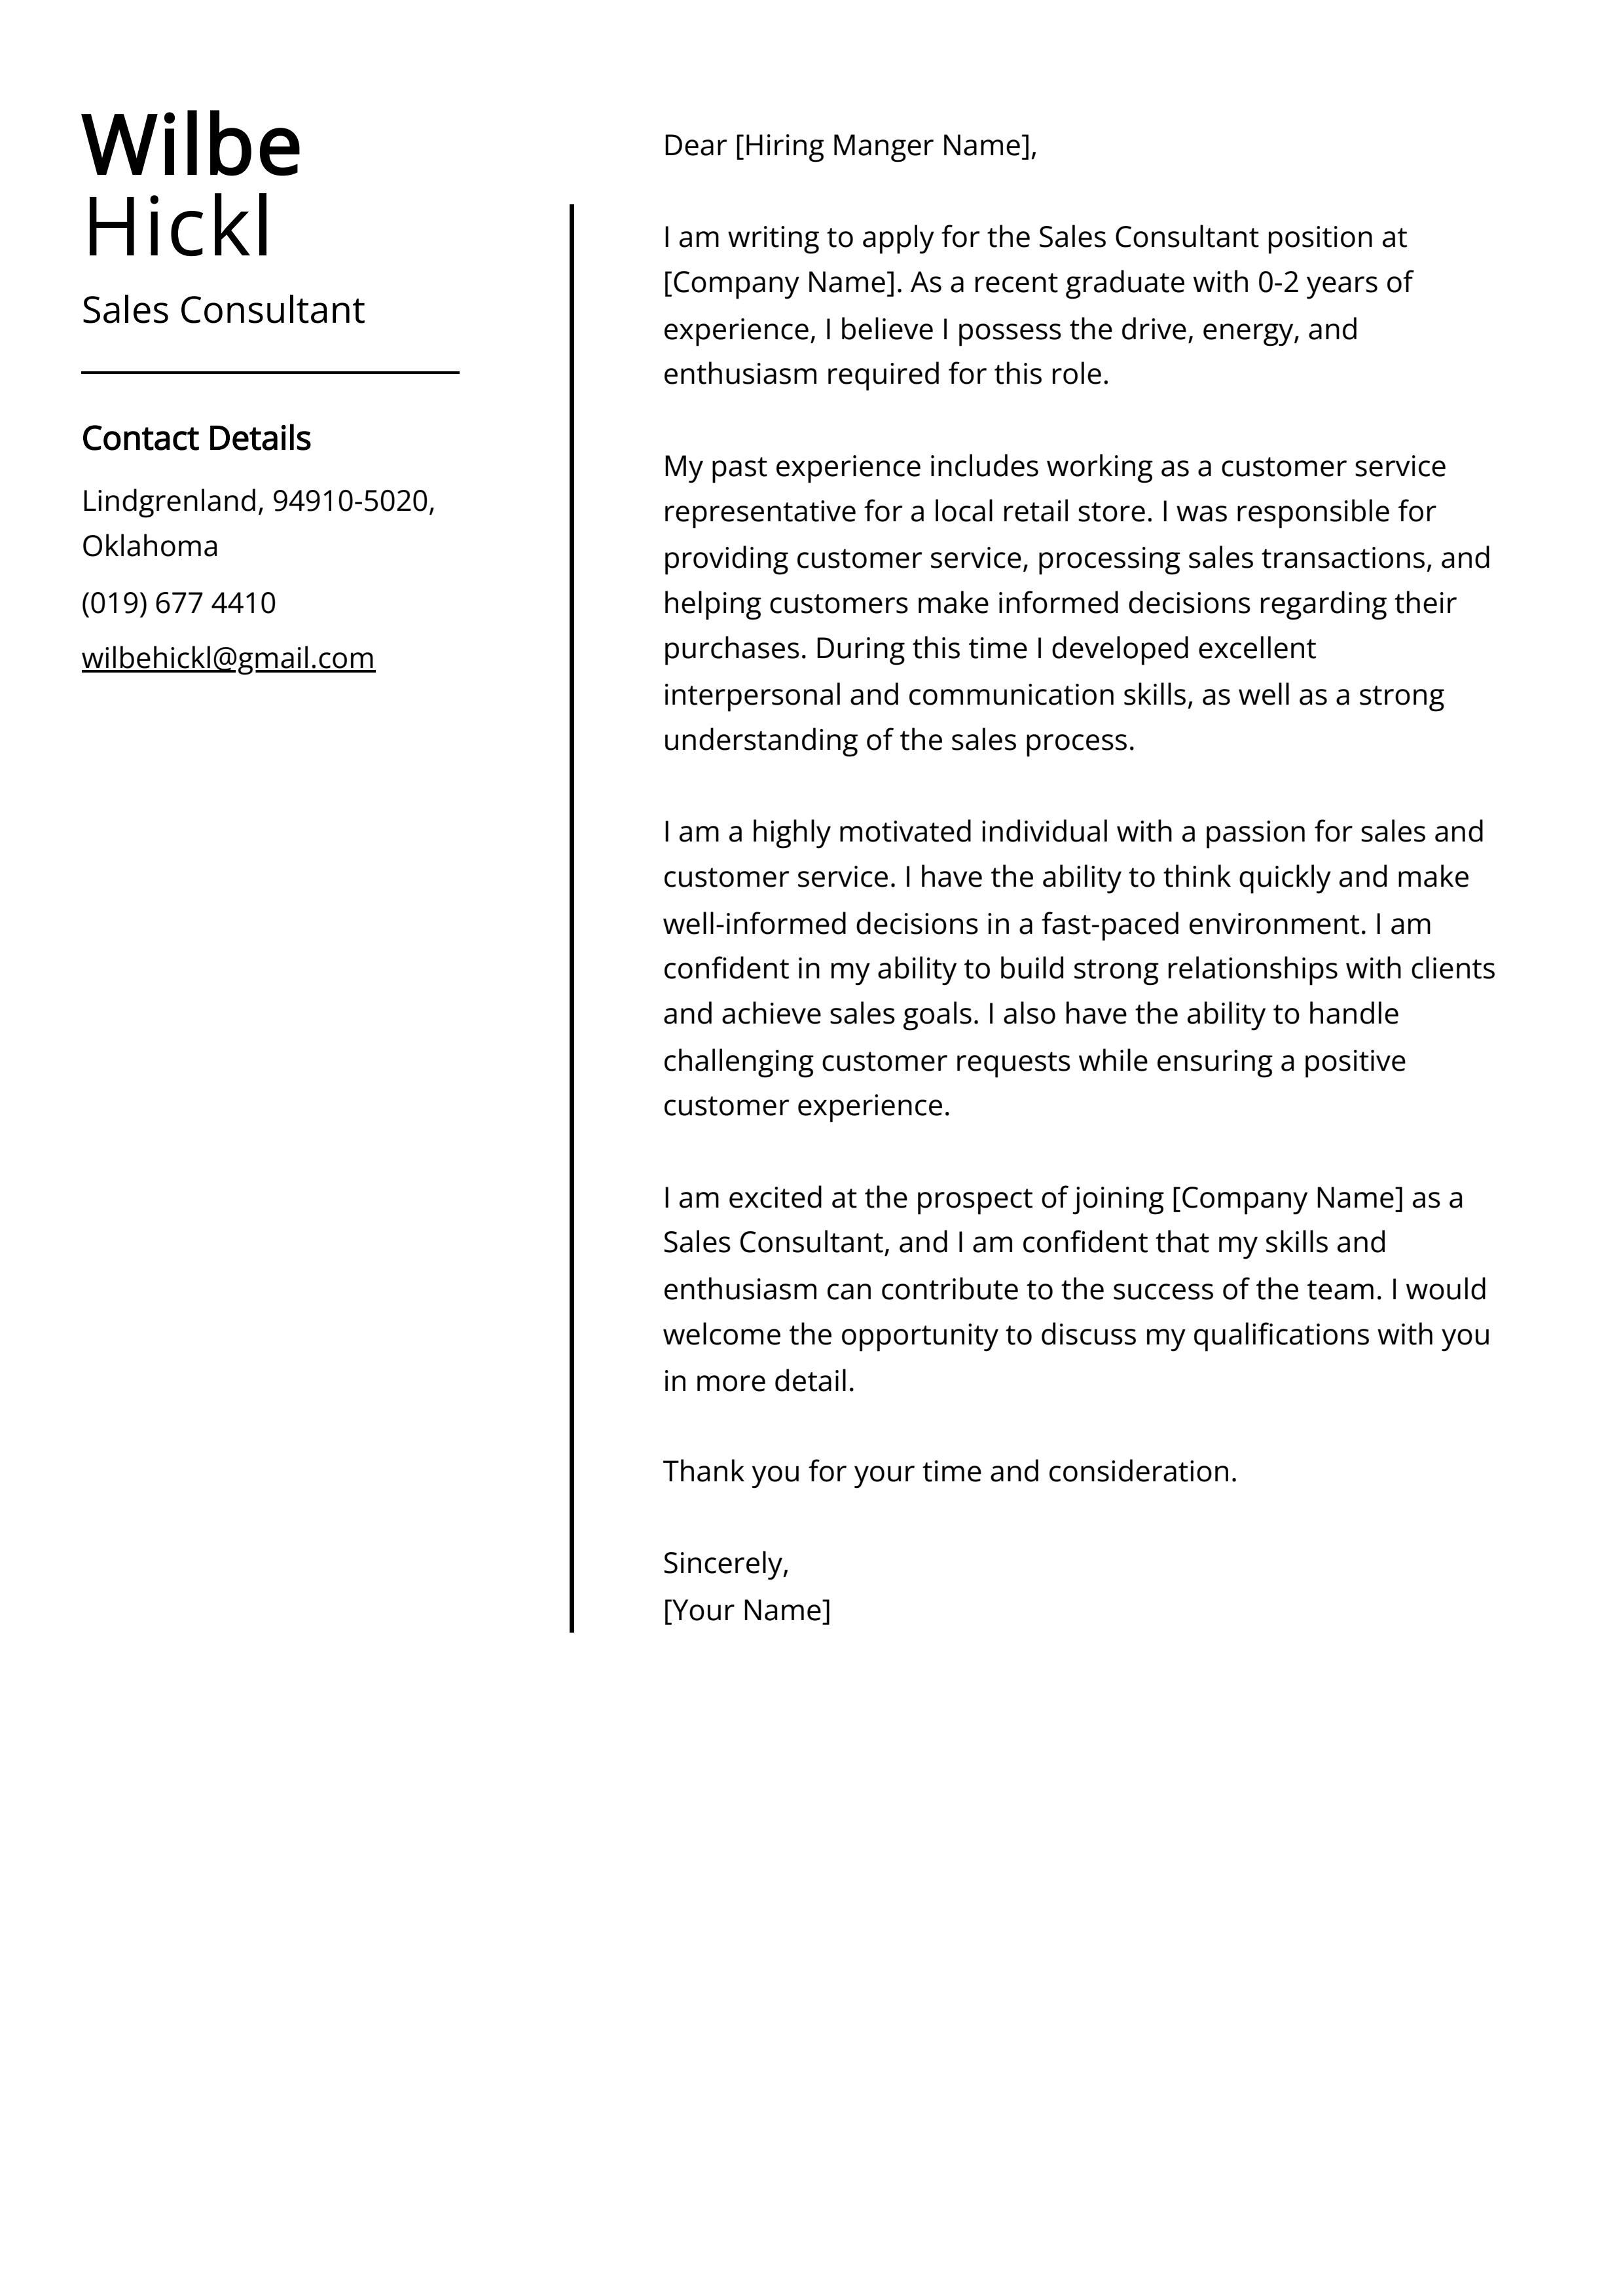 bridal sales consultant cover letter